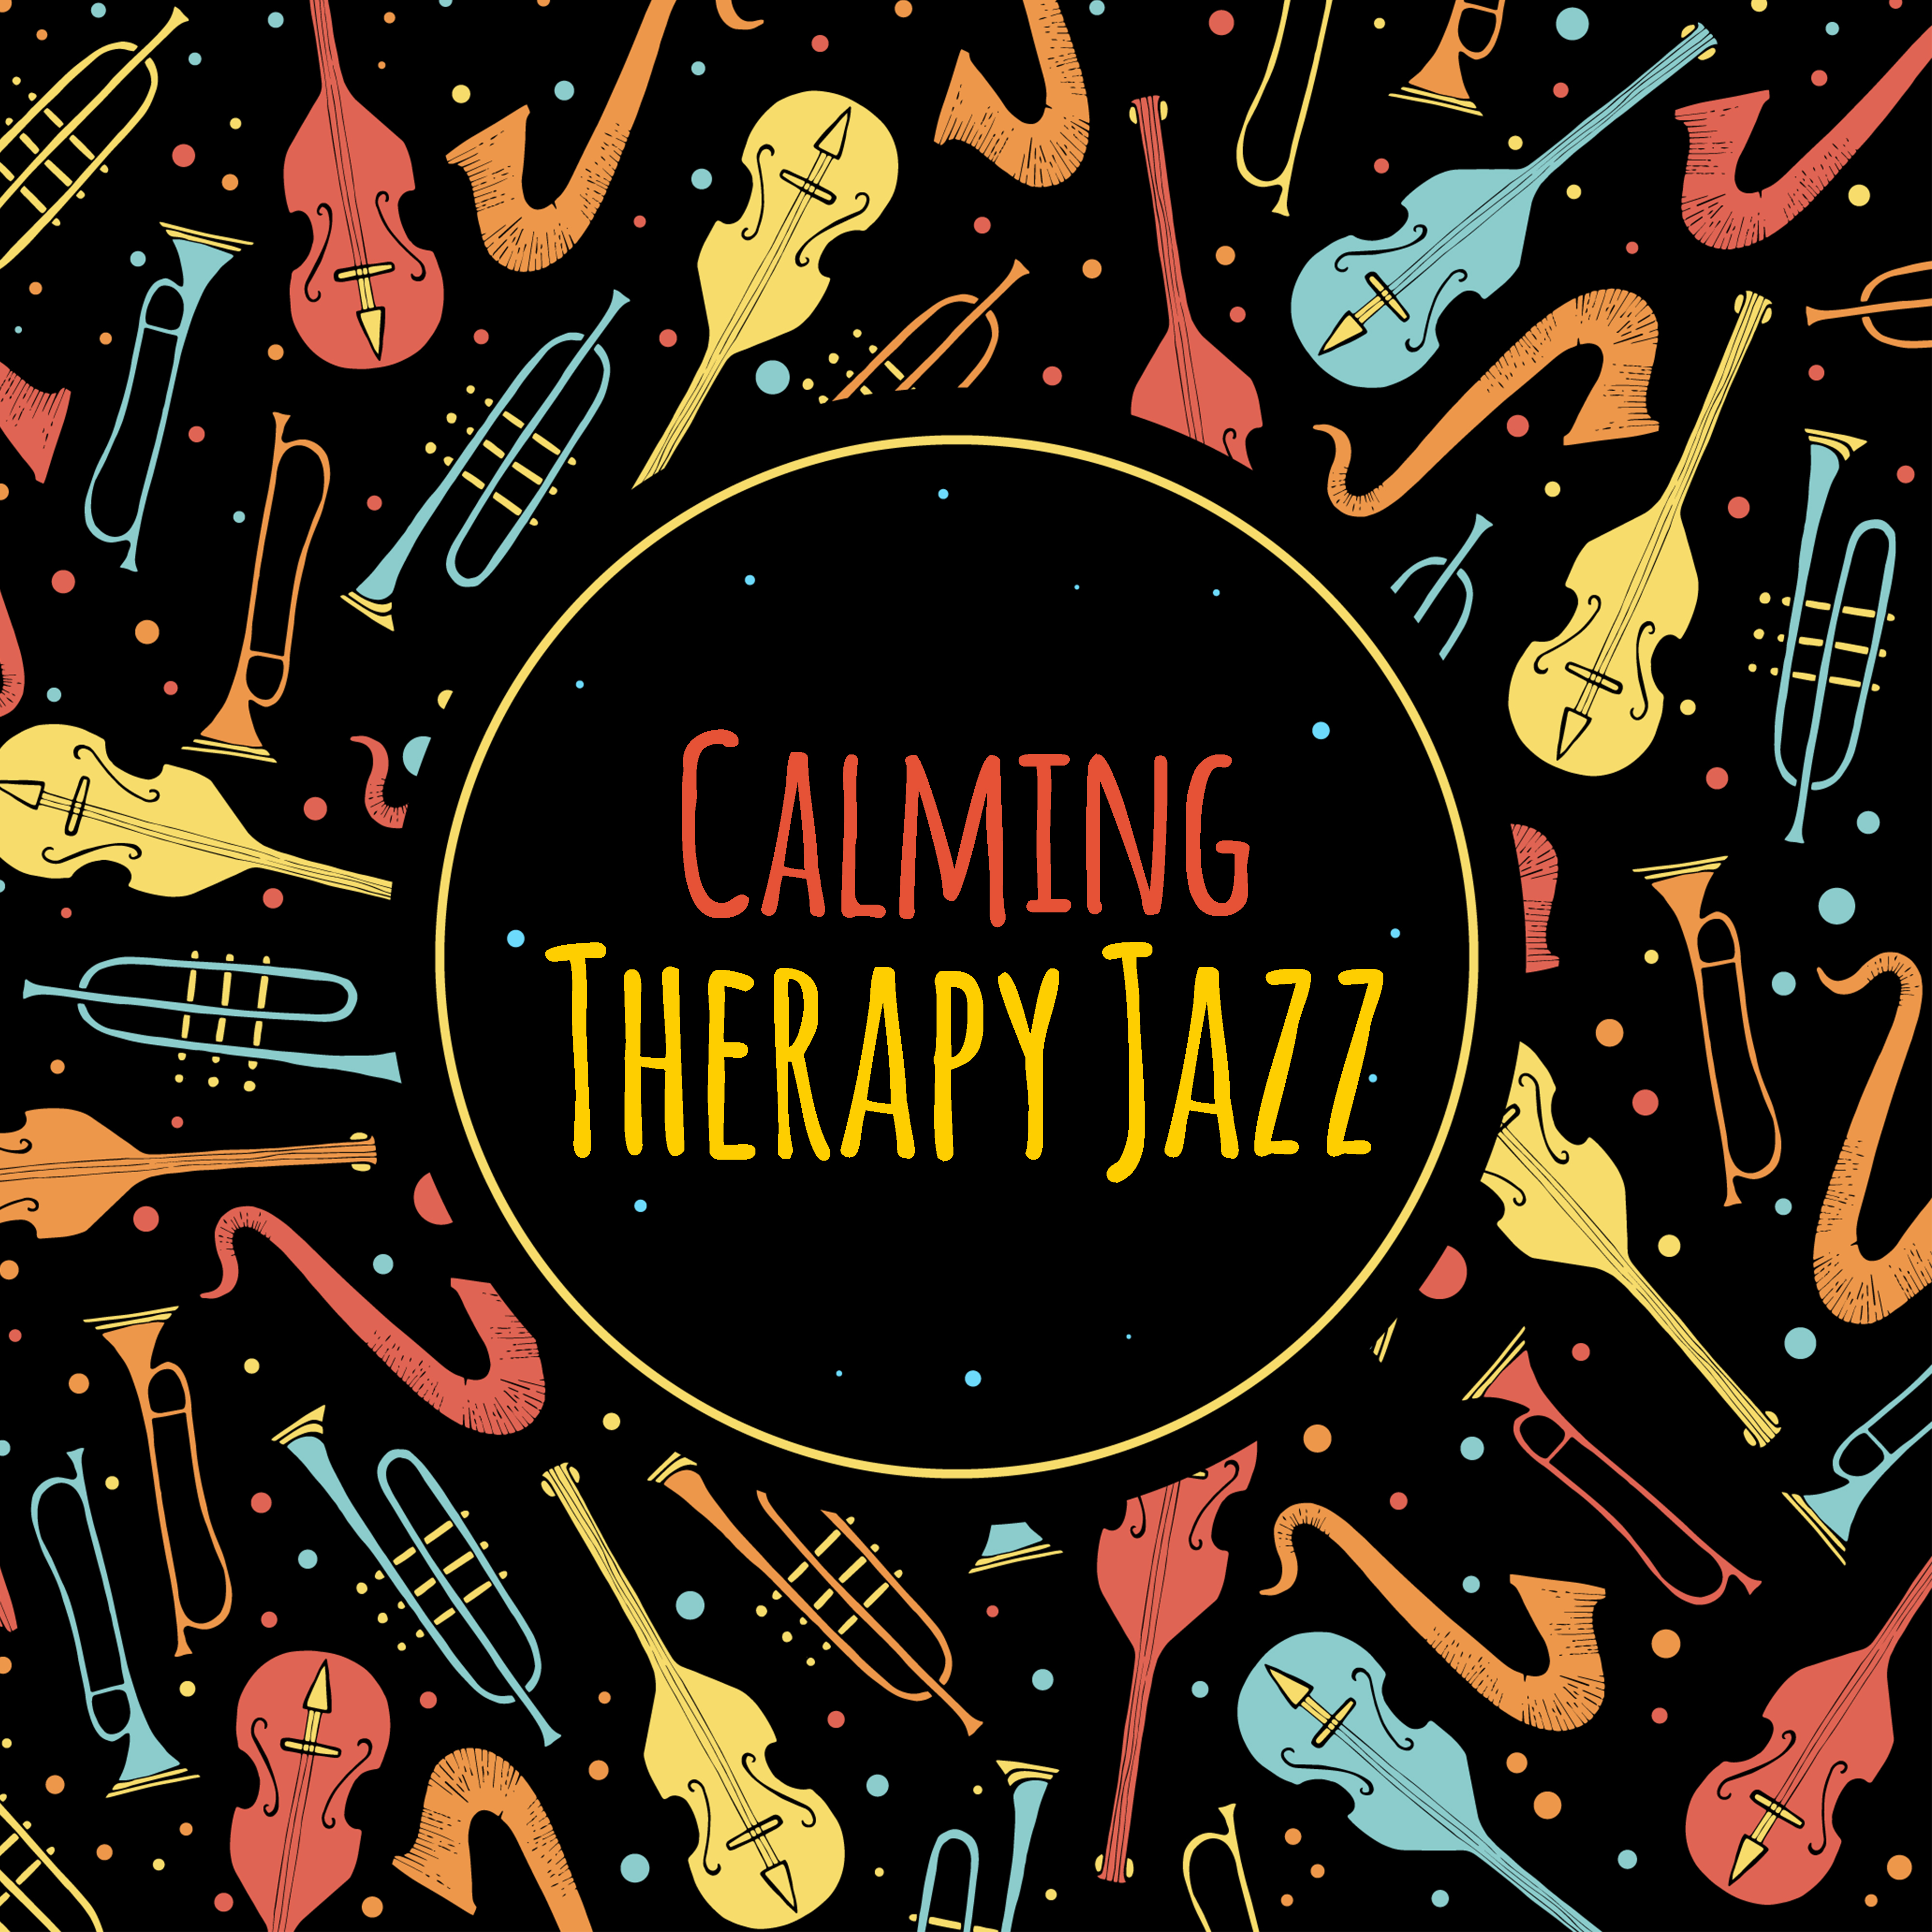 Calming Therapy Jazz